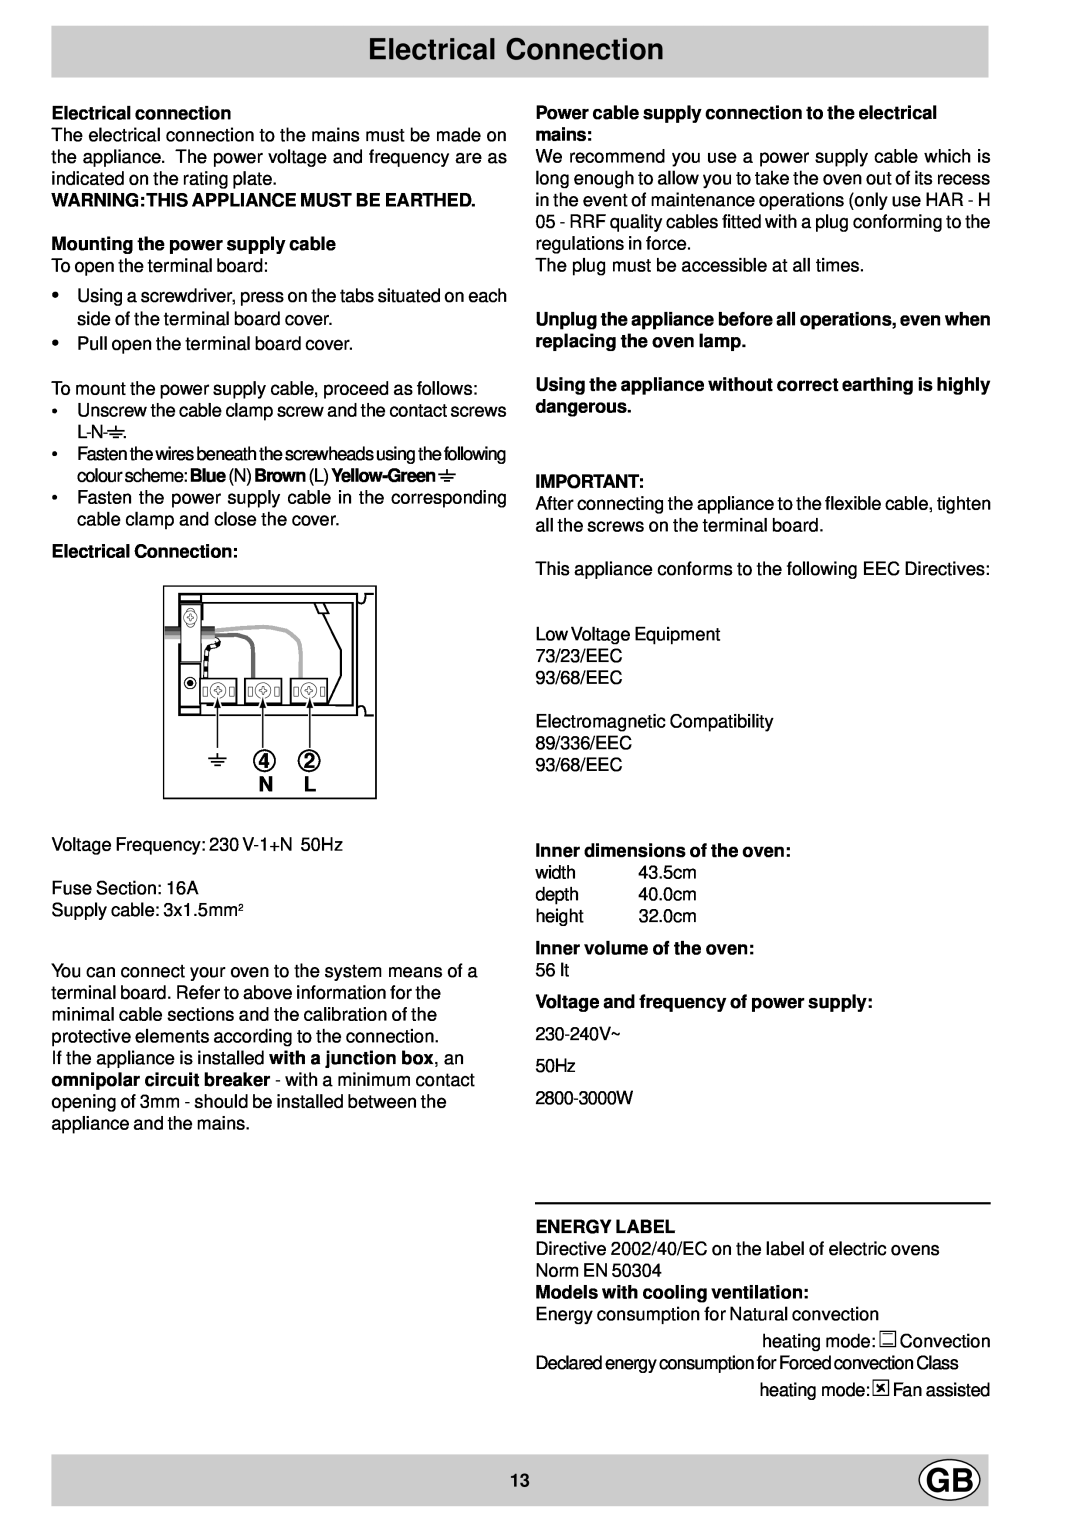 Hotpoint SC52-FC52 manual Electrical Connection, 4 2 N L 